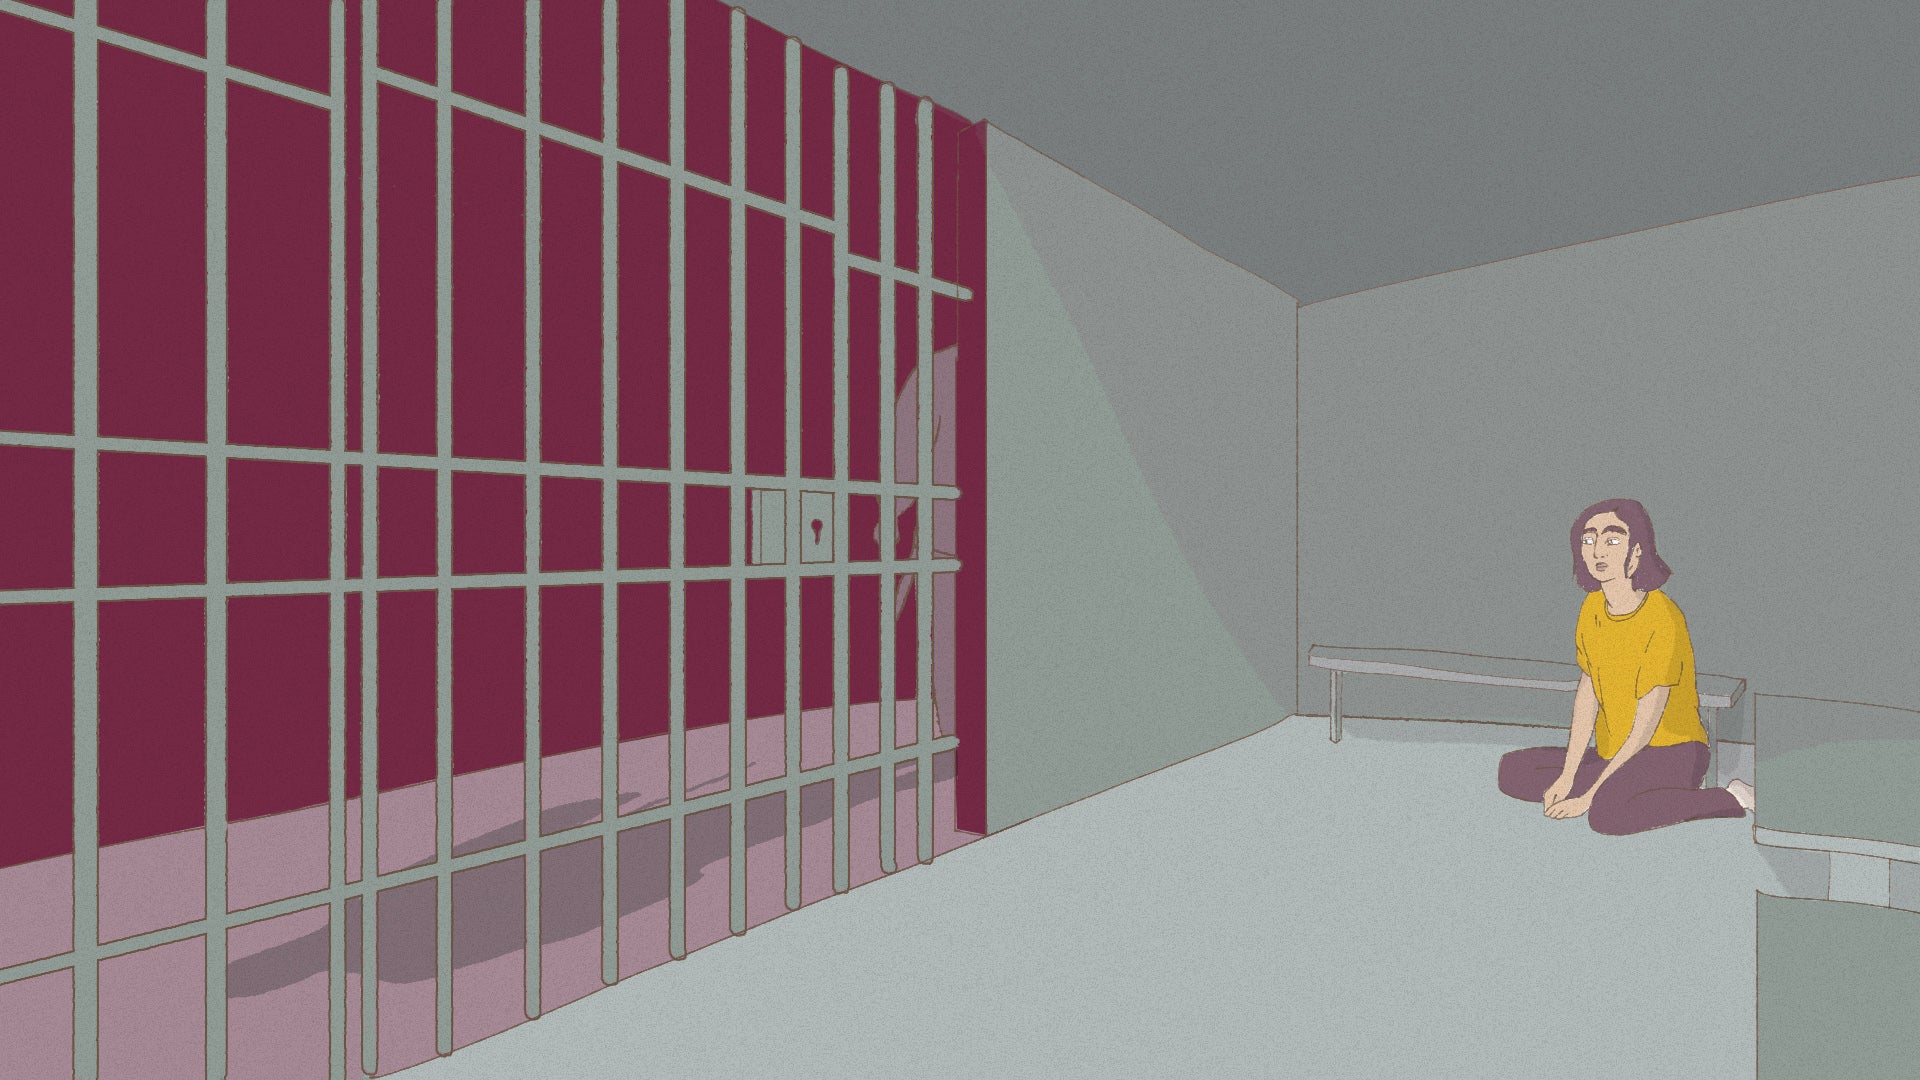 An illustration of a woman in a prison cell